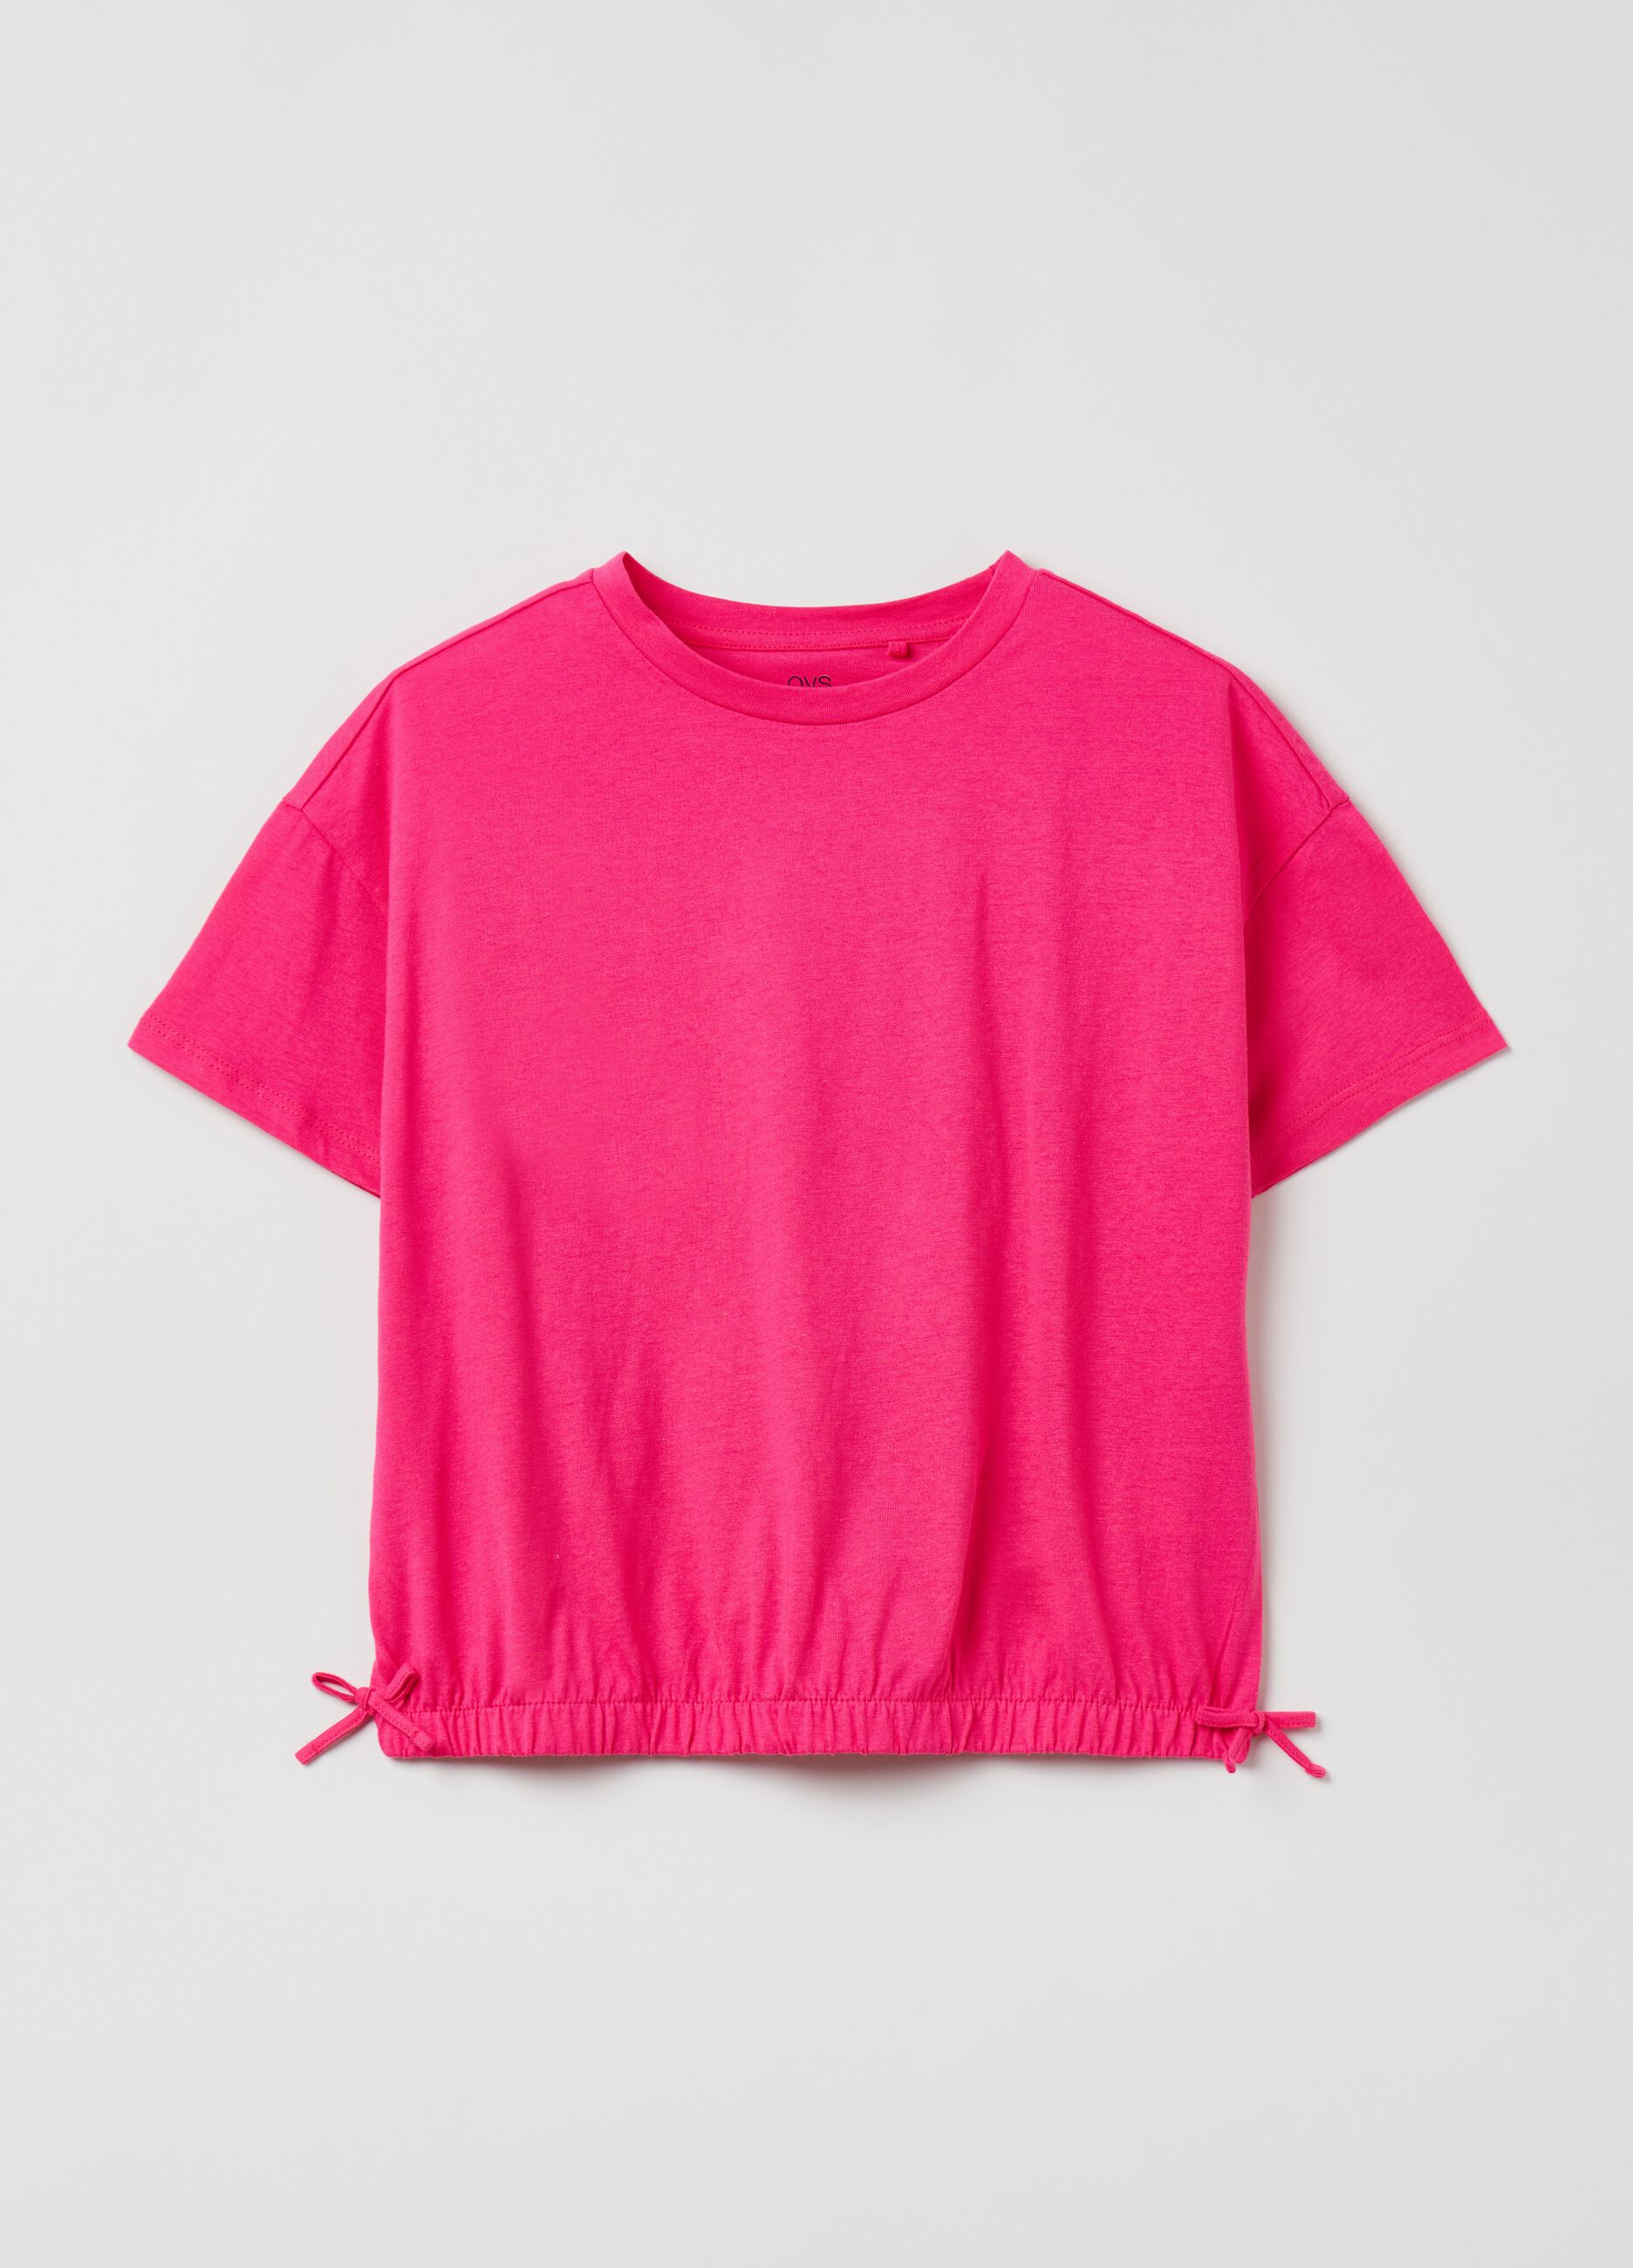 Cotton T-shirt with drawstring